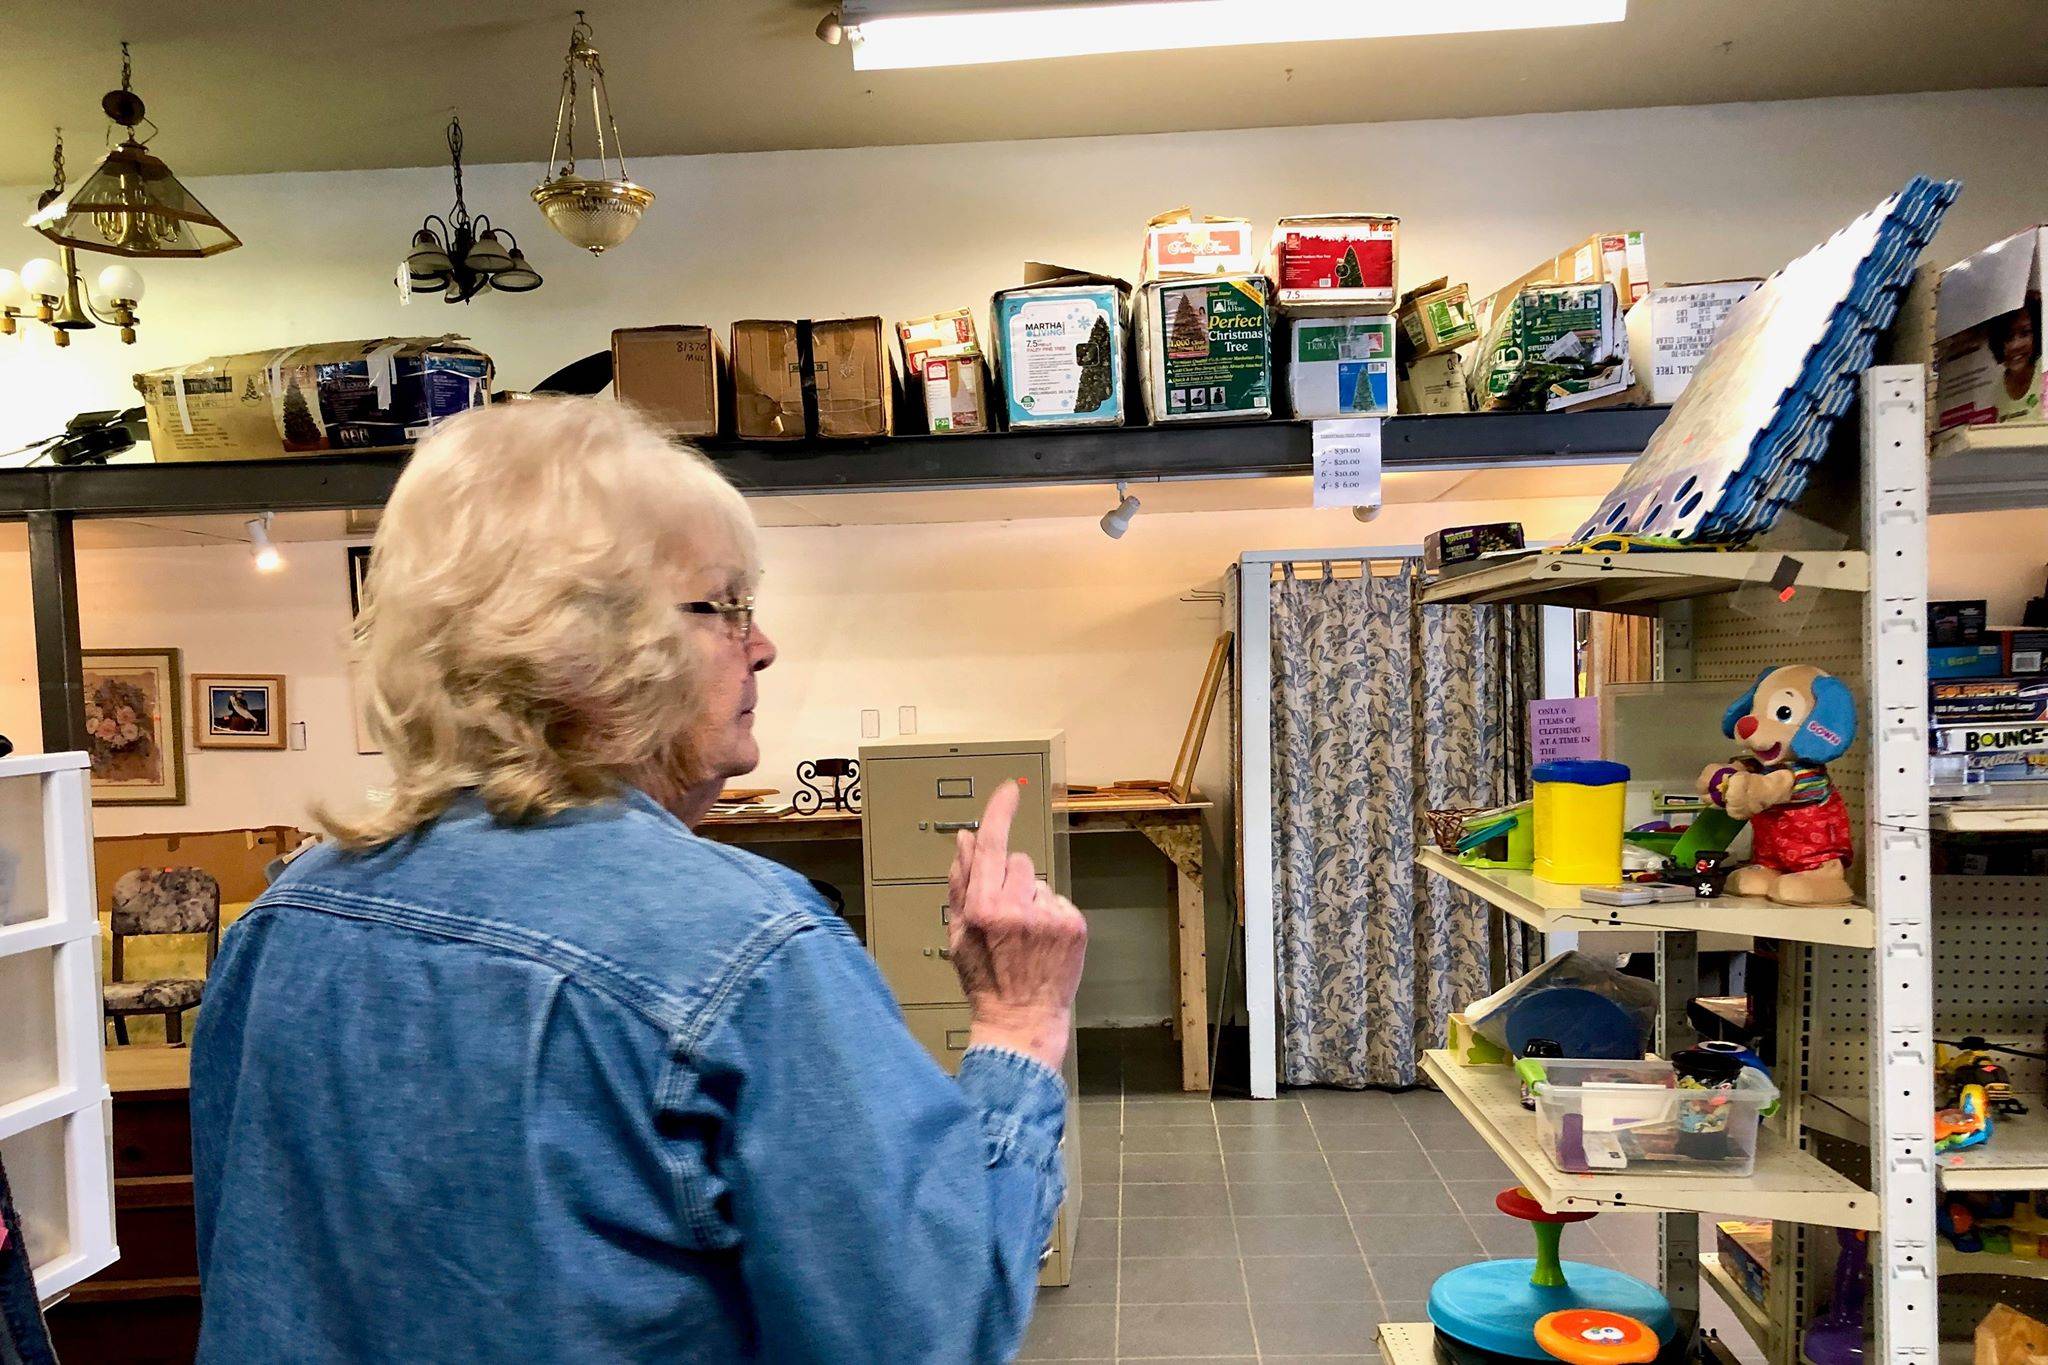 Manager of Bishop’s Attic in Soldotna, Alaska, Jean Warrick, walks around the thrift store where residents can find just about anything in the shop’s many aisles and shelves, on Friday, Feb. 1, 2019. (Photo by Victoria Petersen/Peninsula Clarion)